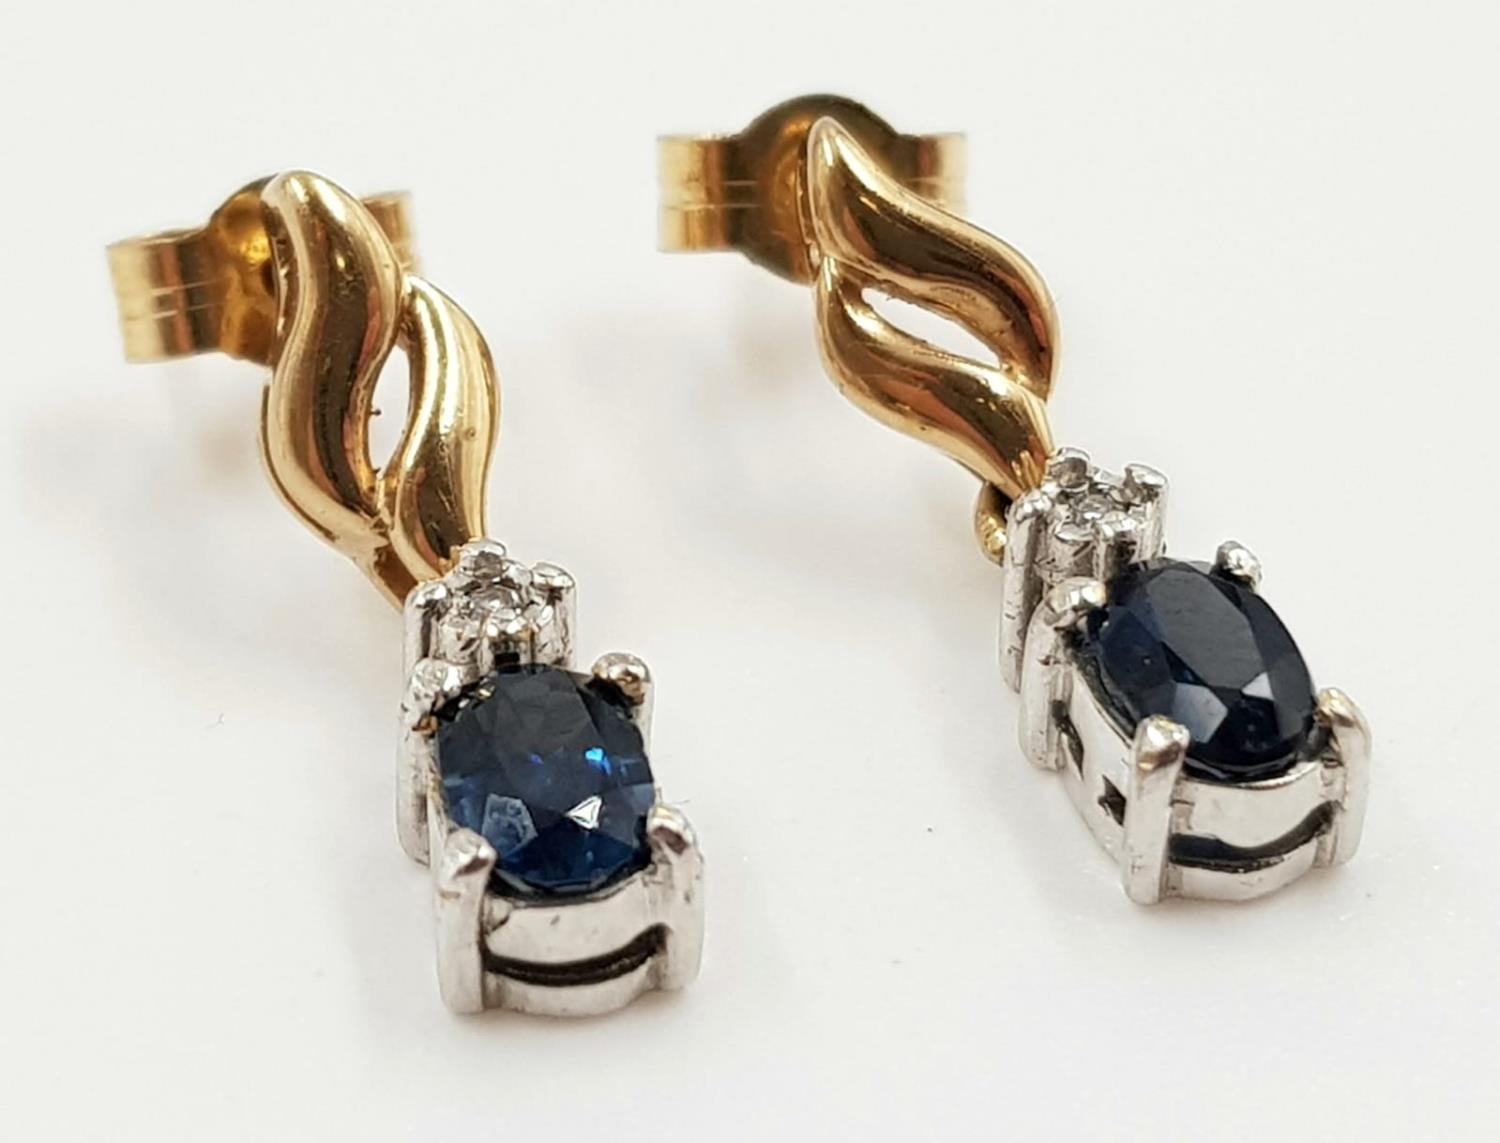 A pair of sapphire and diamond earrings in 9ct gold. 2.4g total weight.